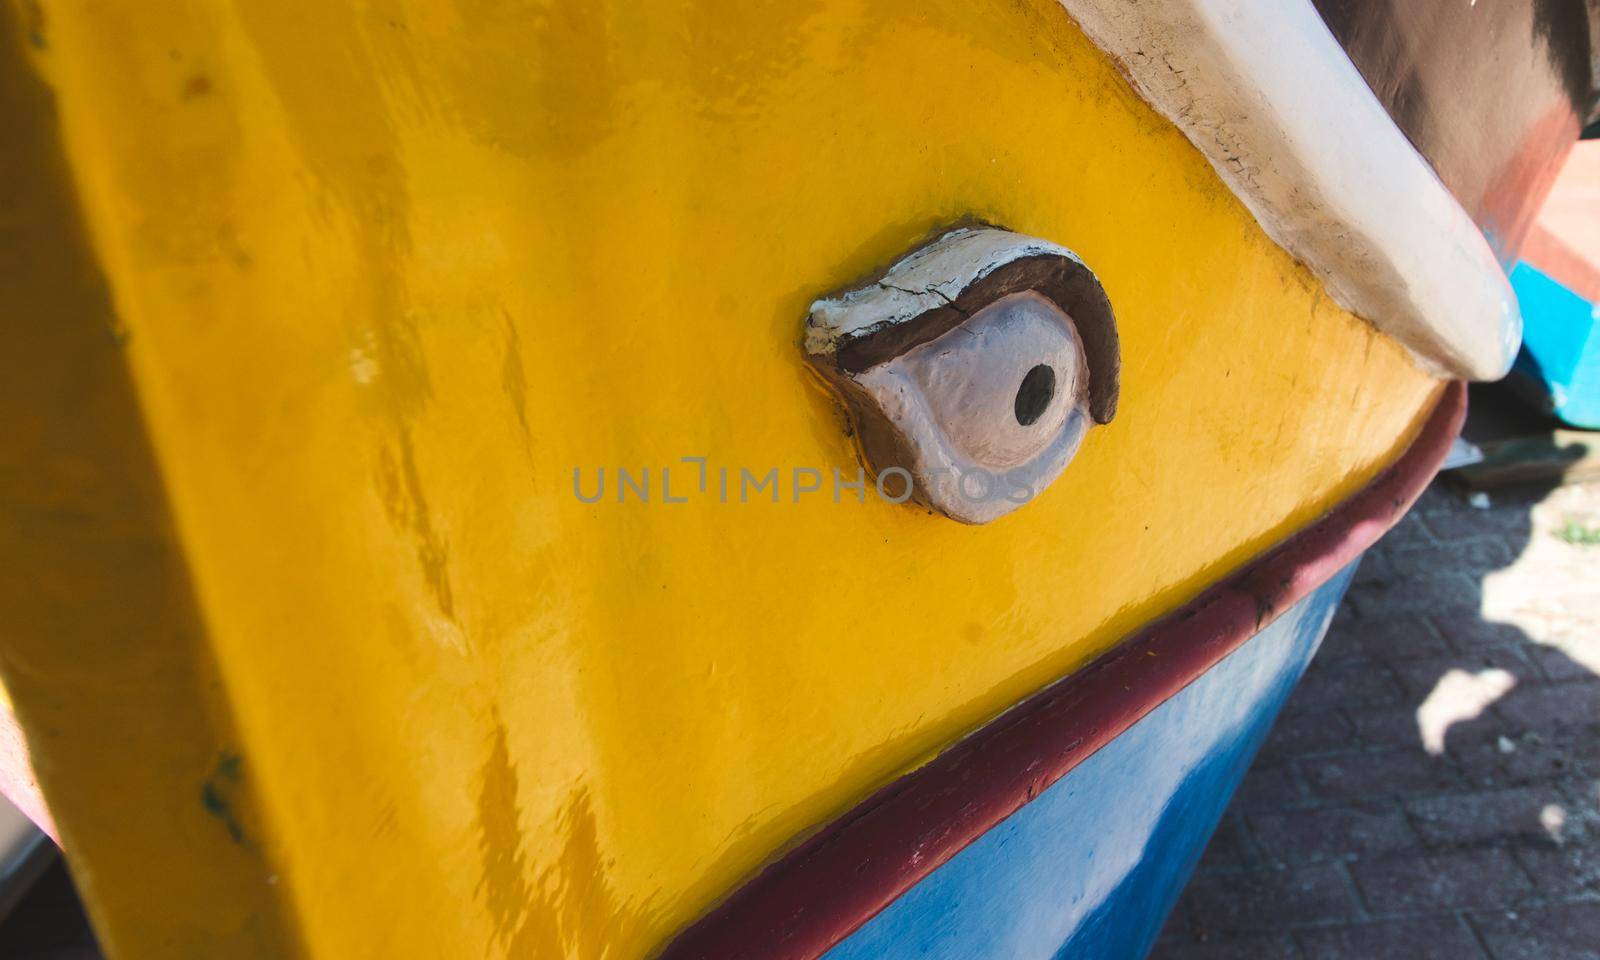 Close-up on the eye of a Luzzu, a traditional Mediterranean fishing boat